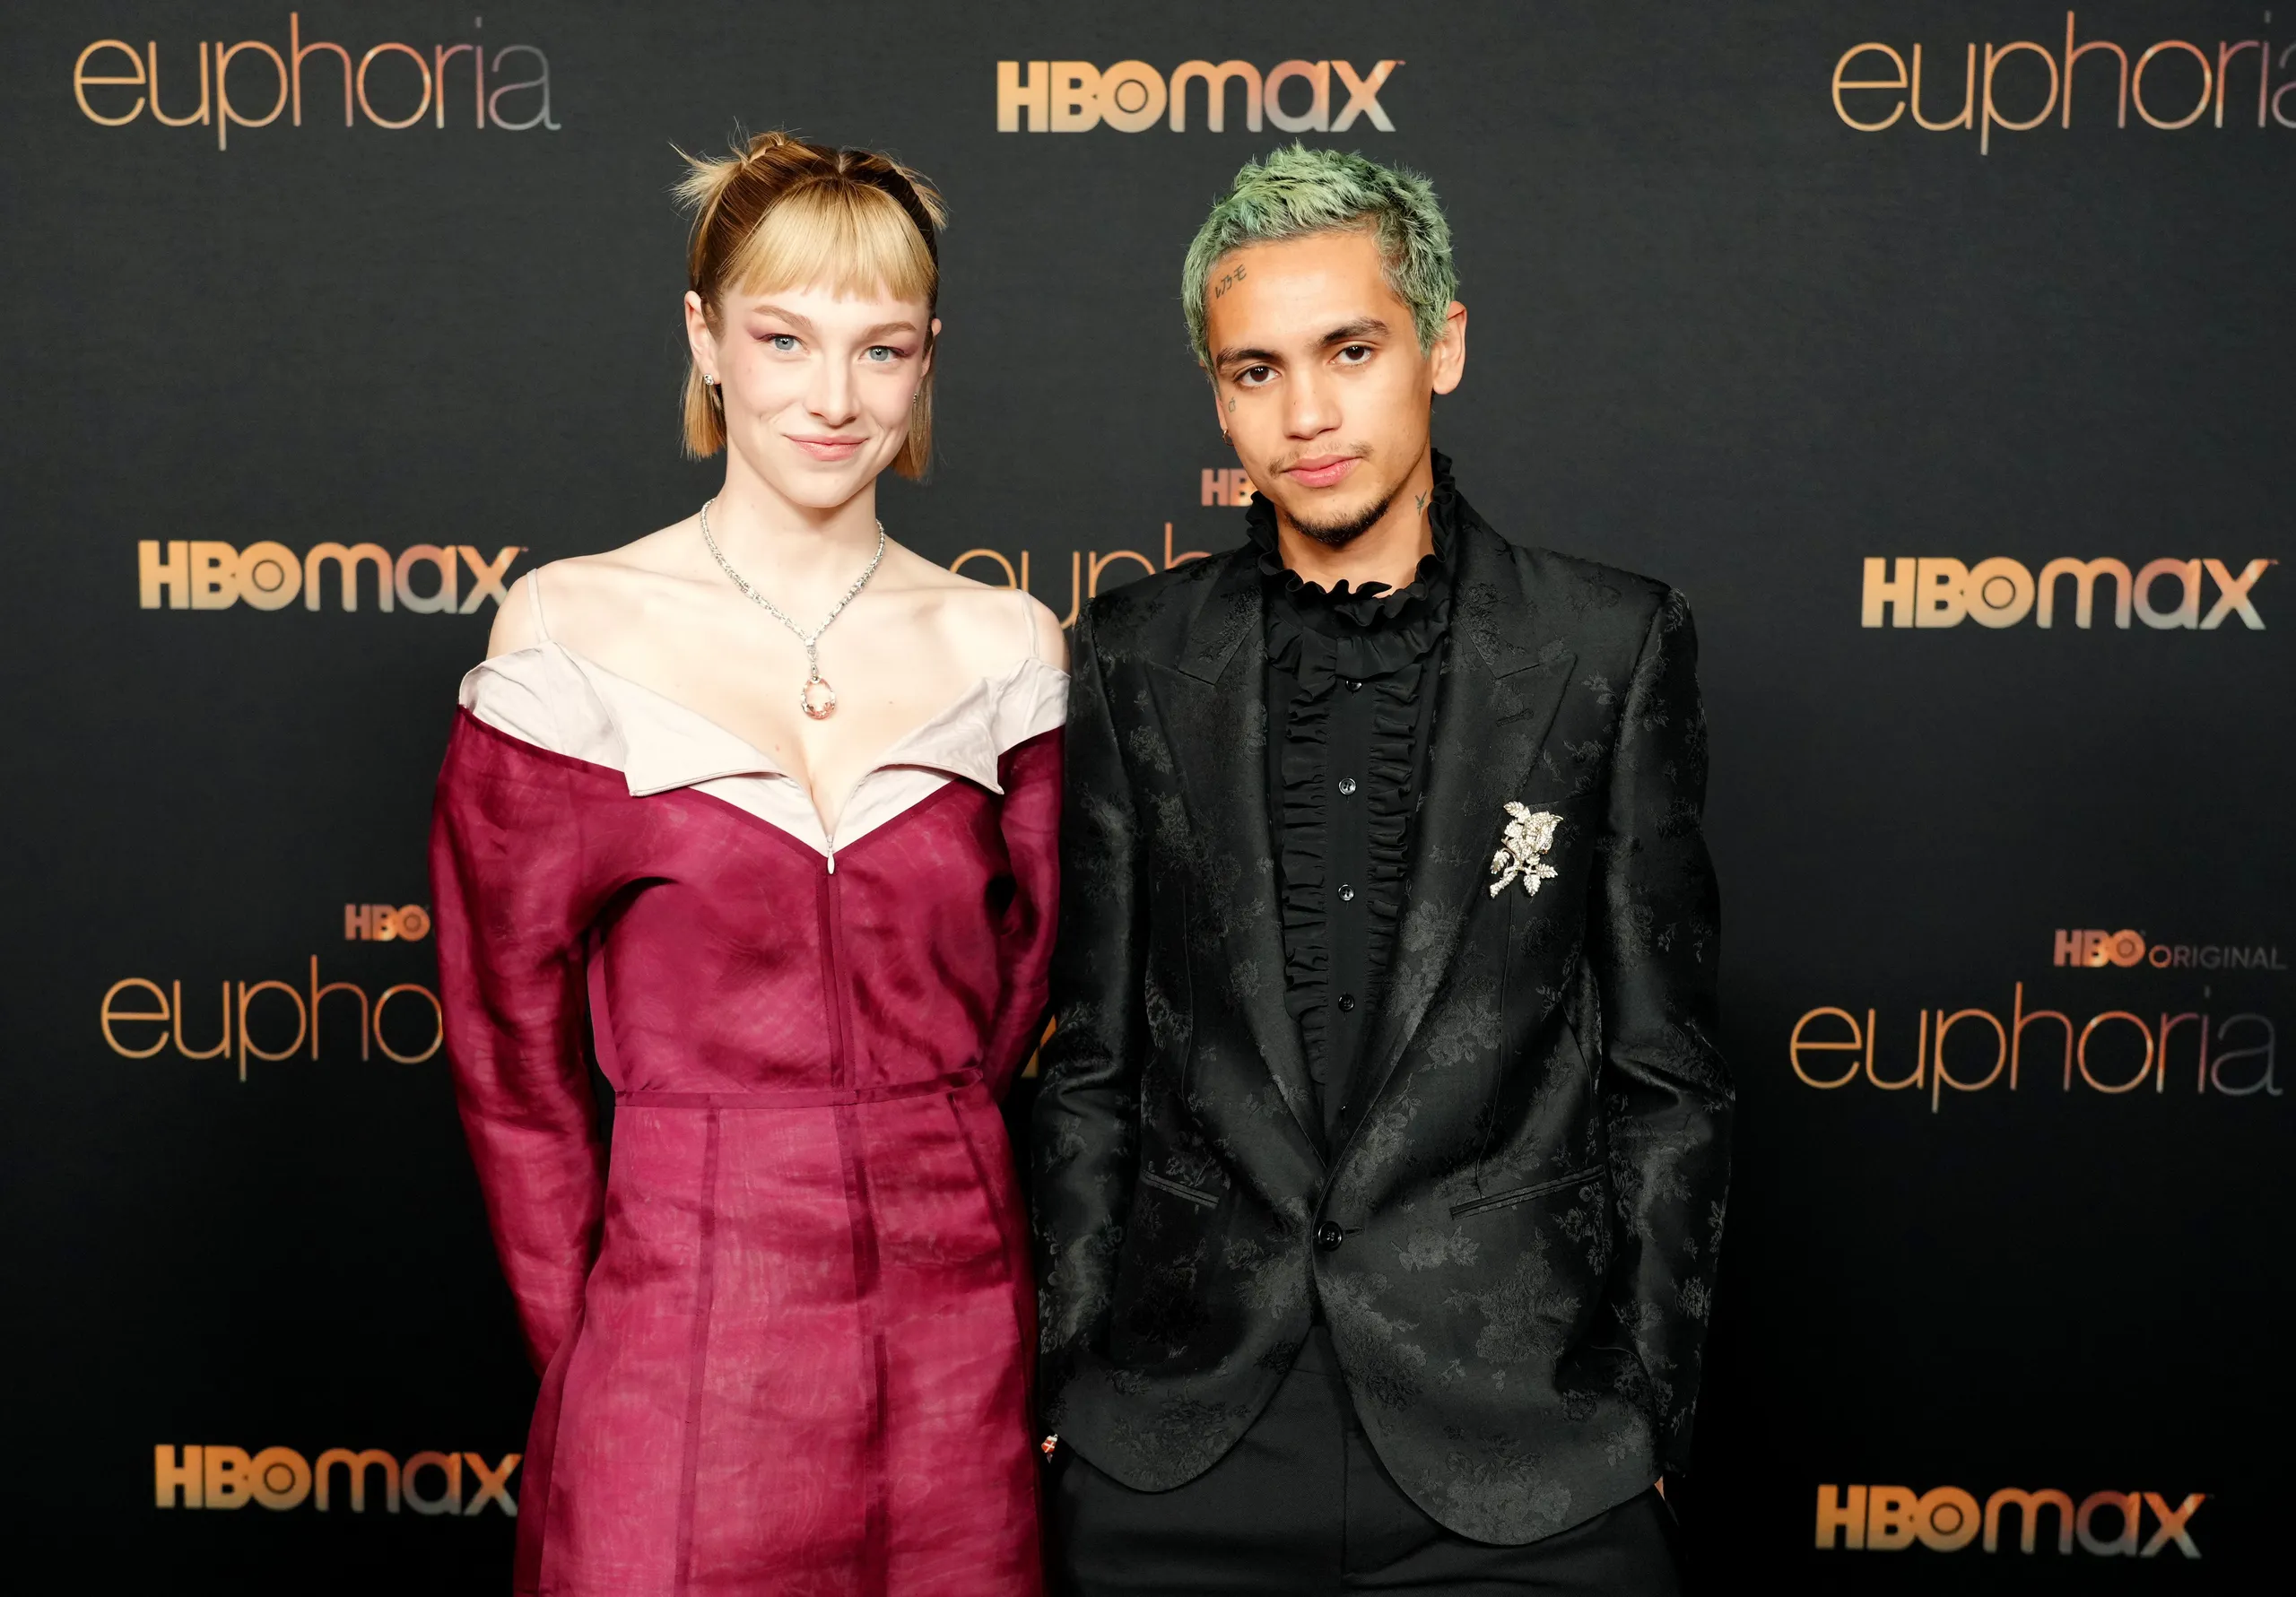 Hunter Schafer and Dominic Fike had been sparking dating rumors after co-starring in Euphoria.